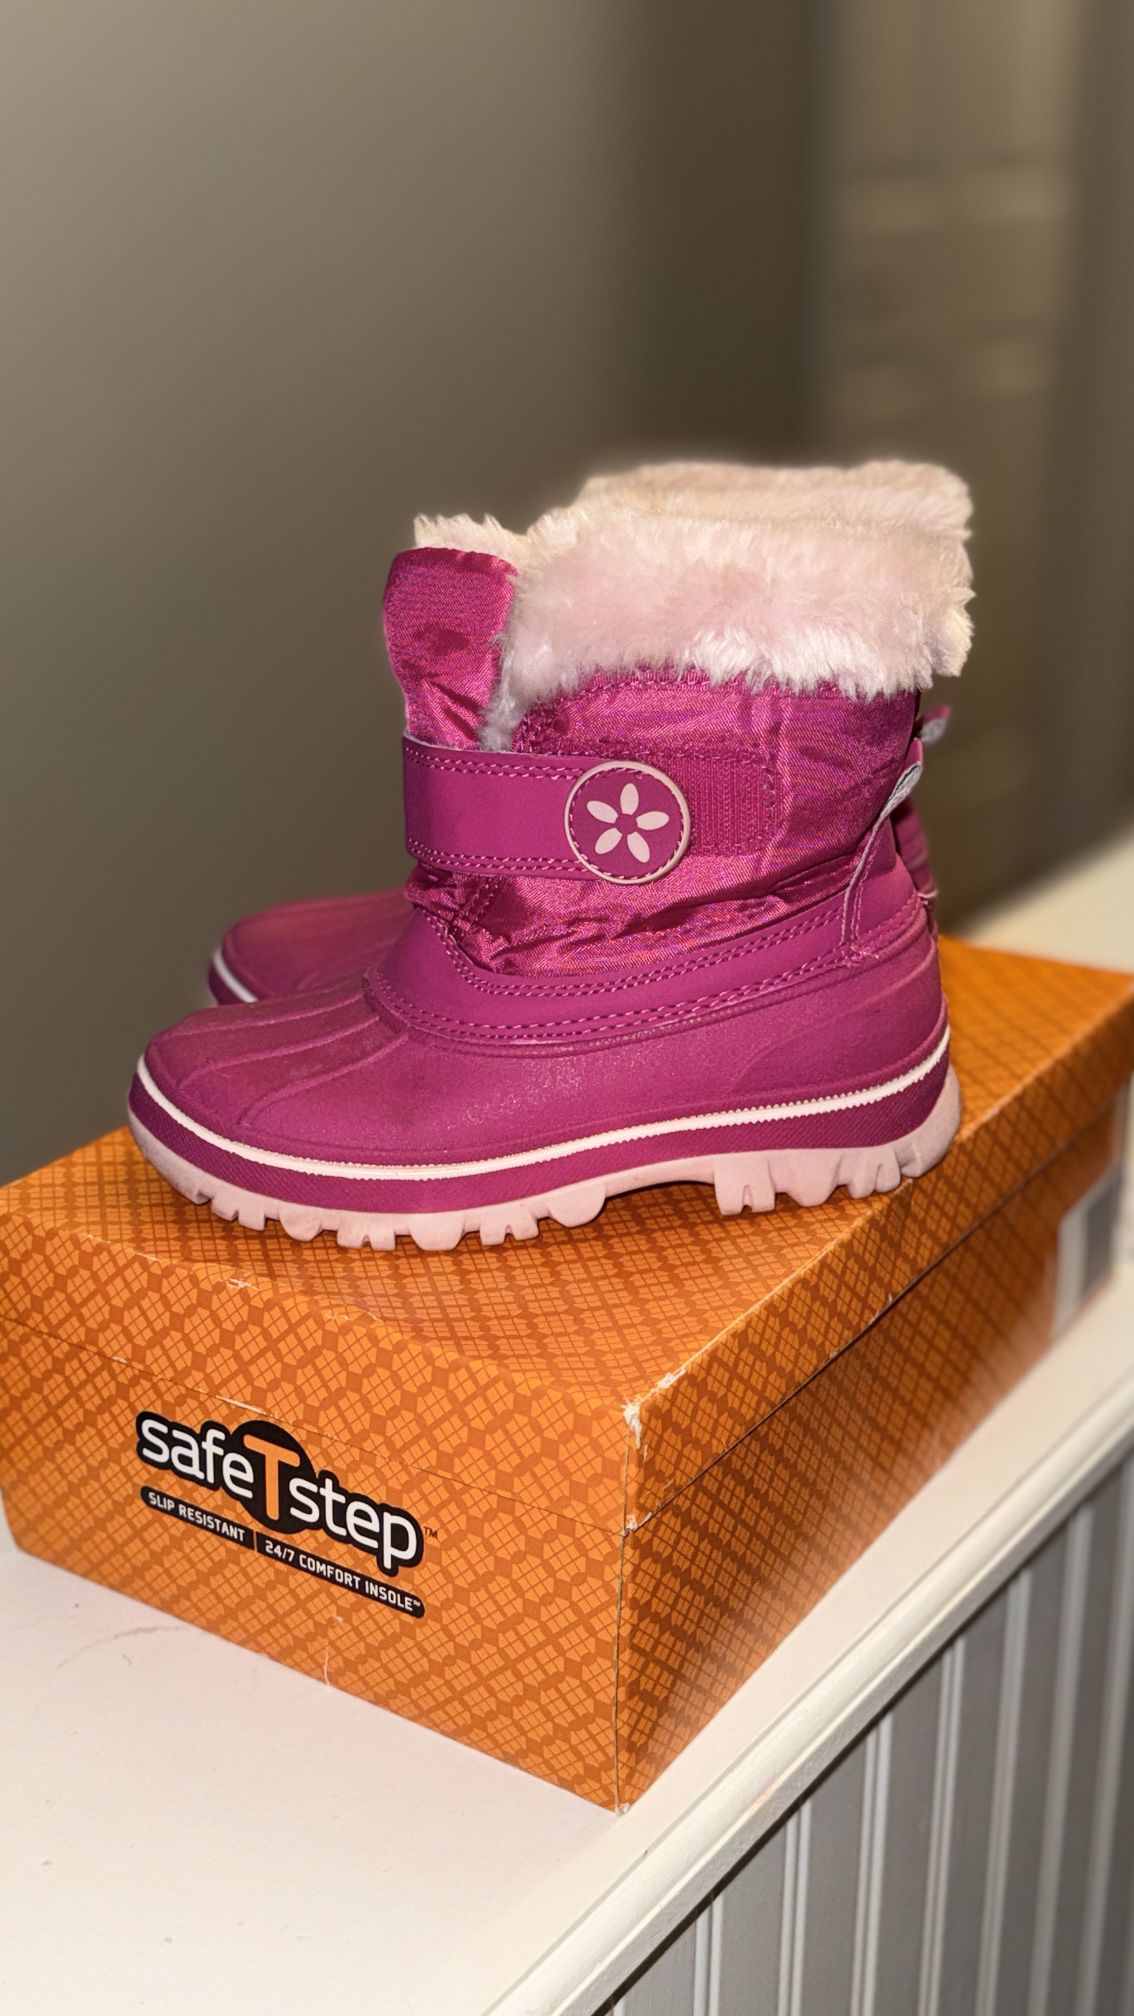 Snow Boots. Child Size 11/12. Pink. Waterproof 